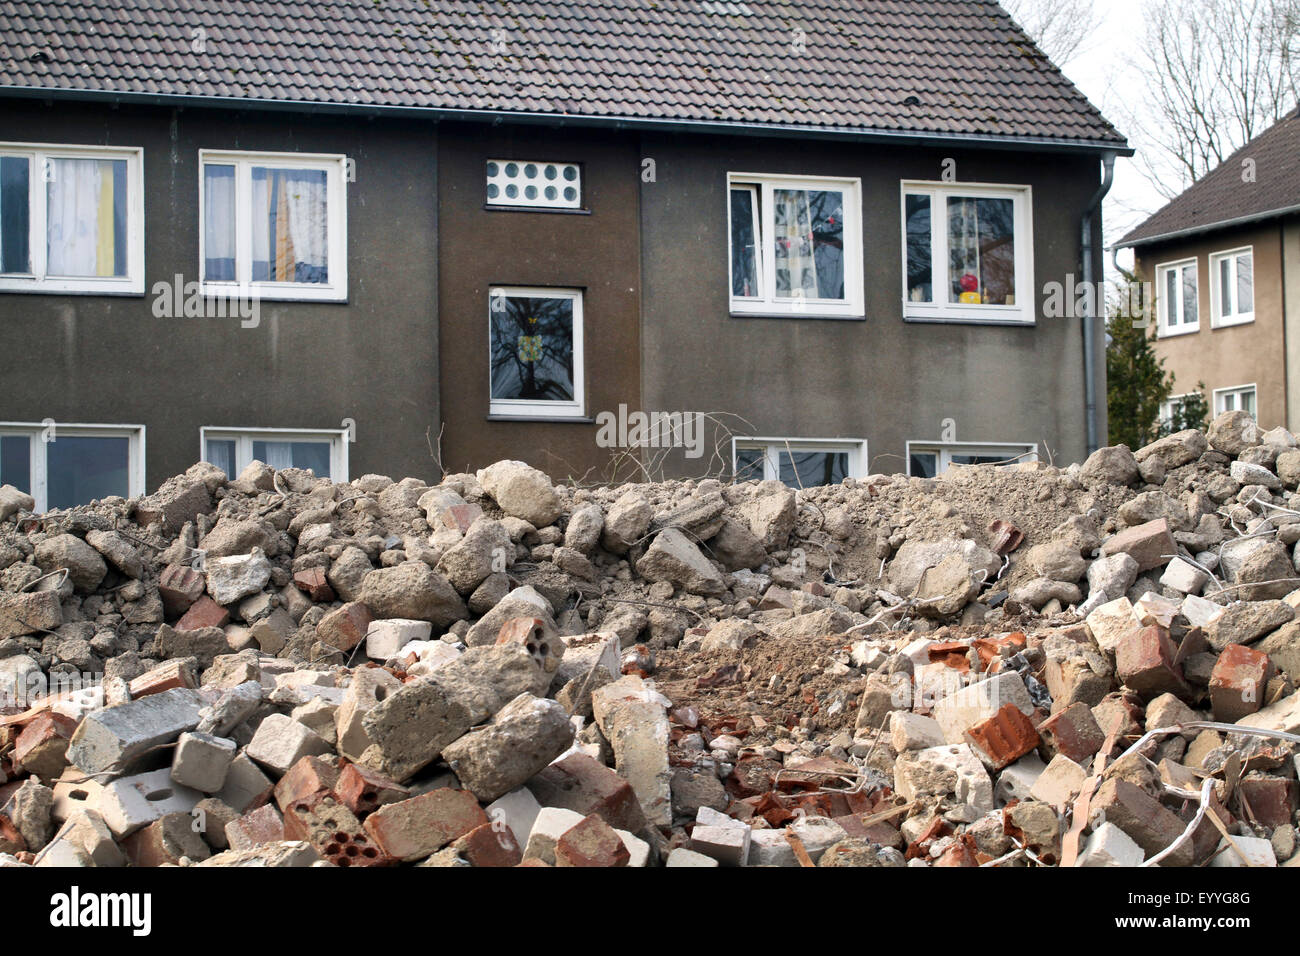 demolition waste inf front of a building, Germany Stock Photo